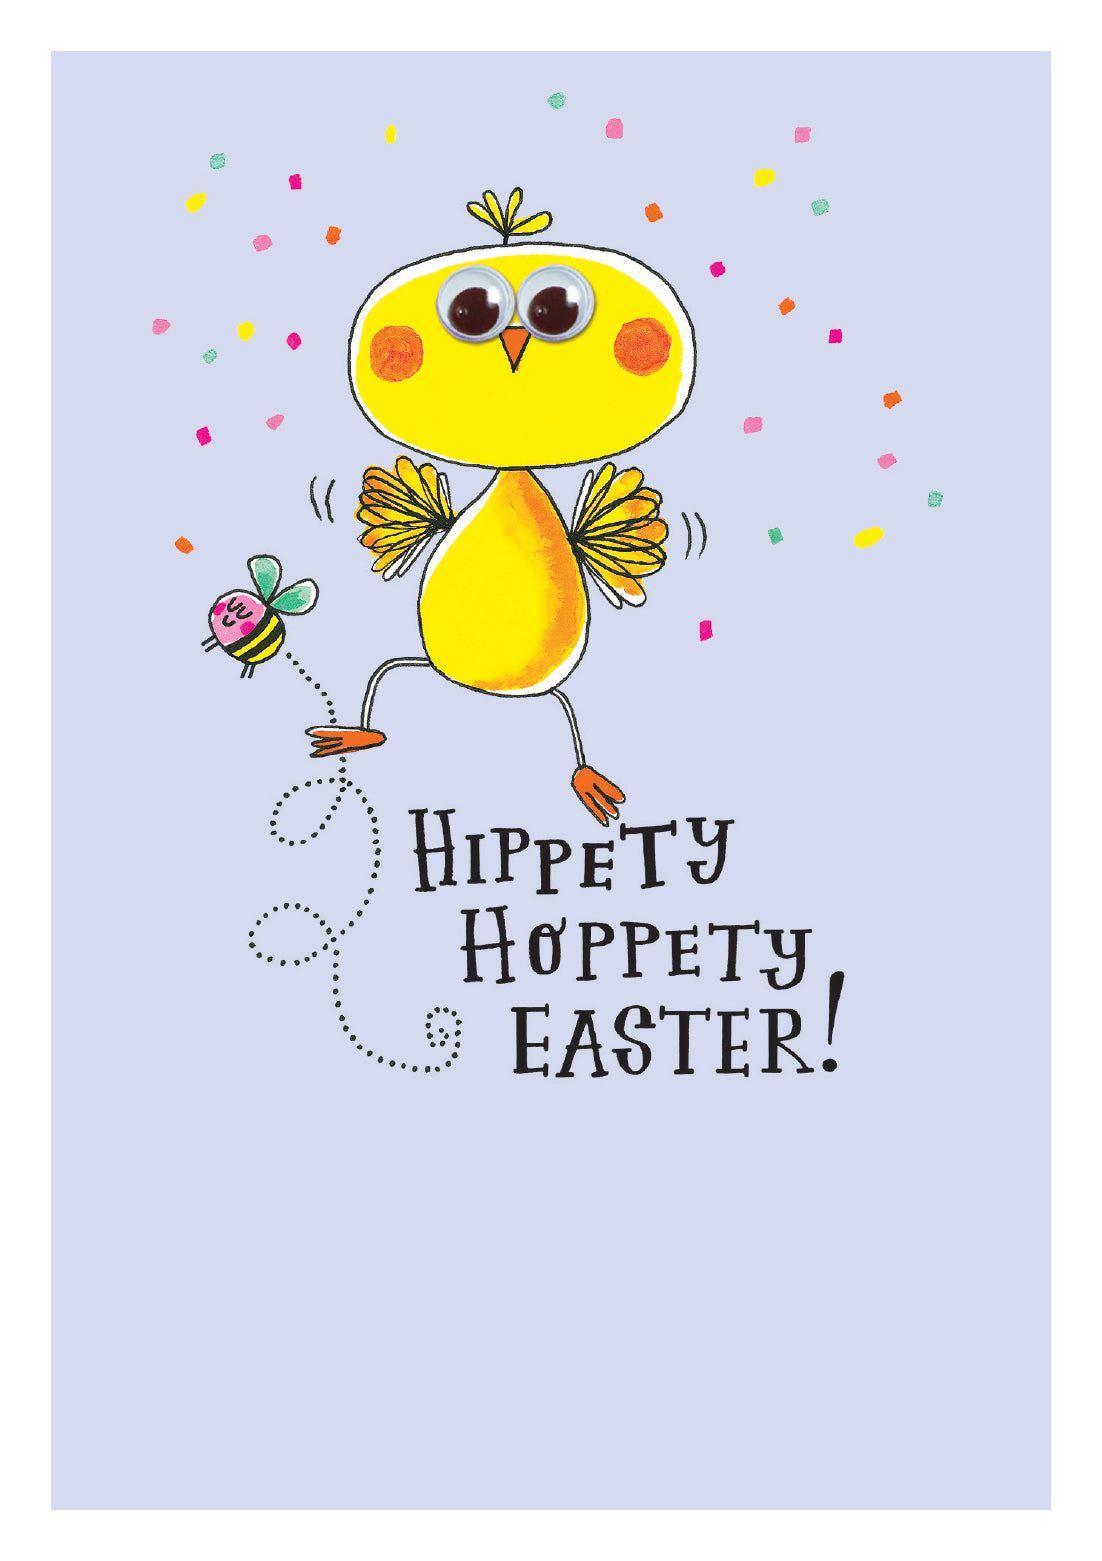 Hippety Hoppety Chick Easter Card by penny black